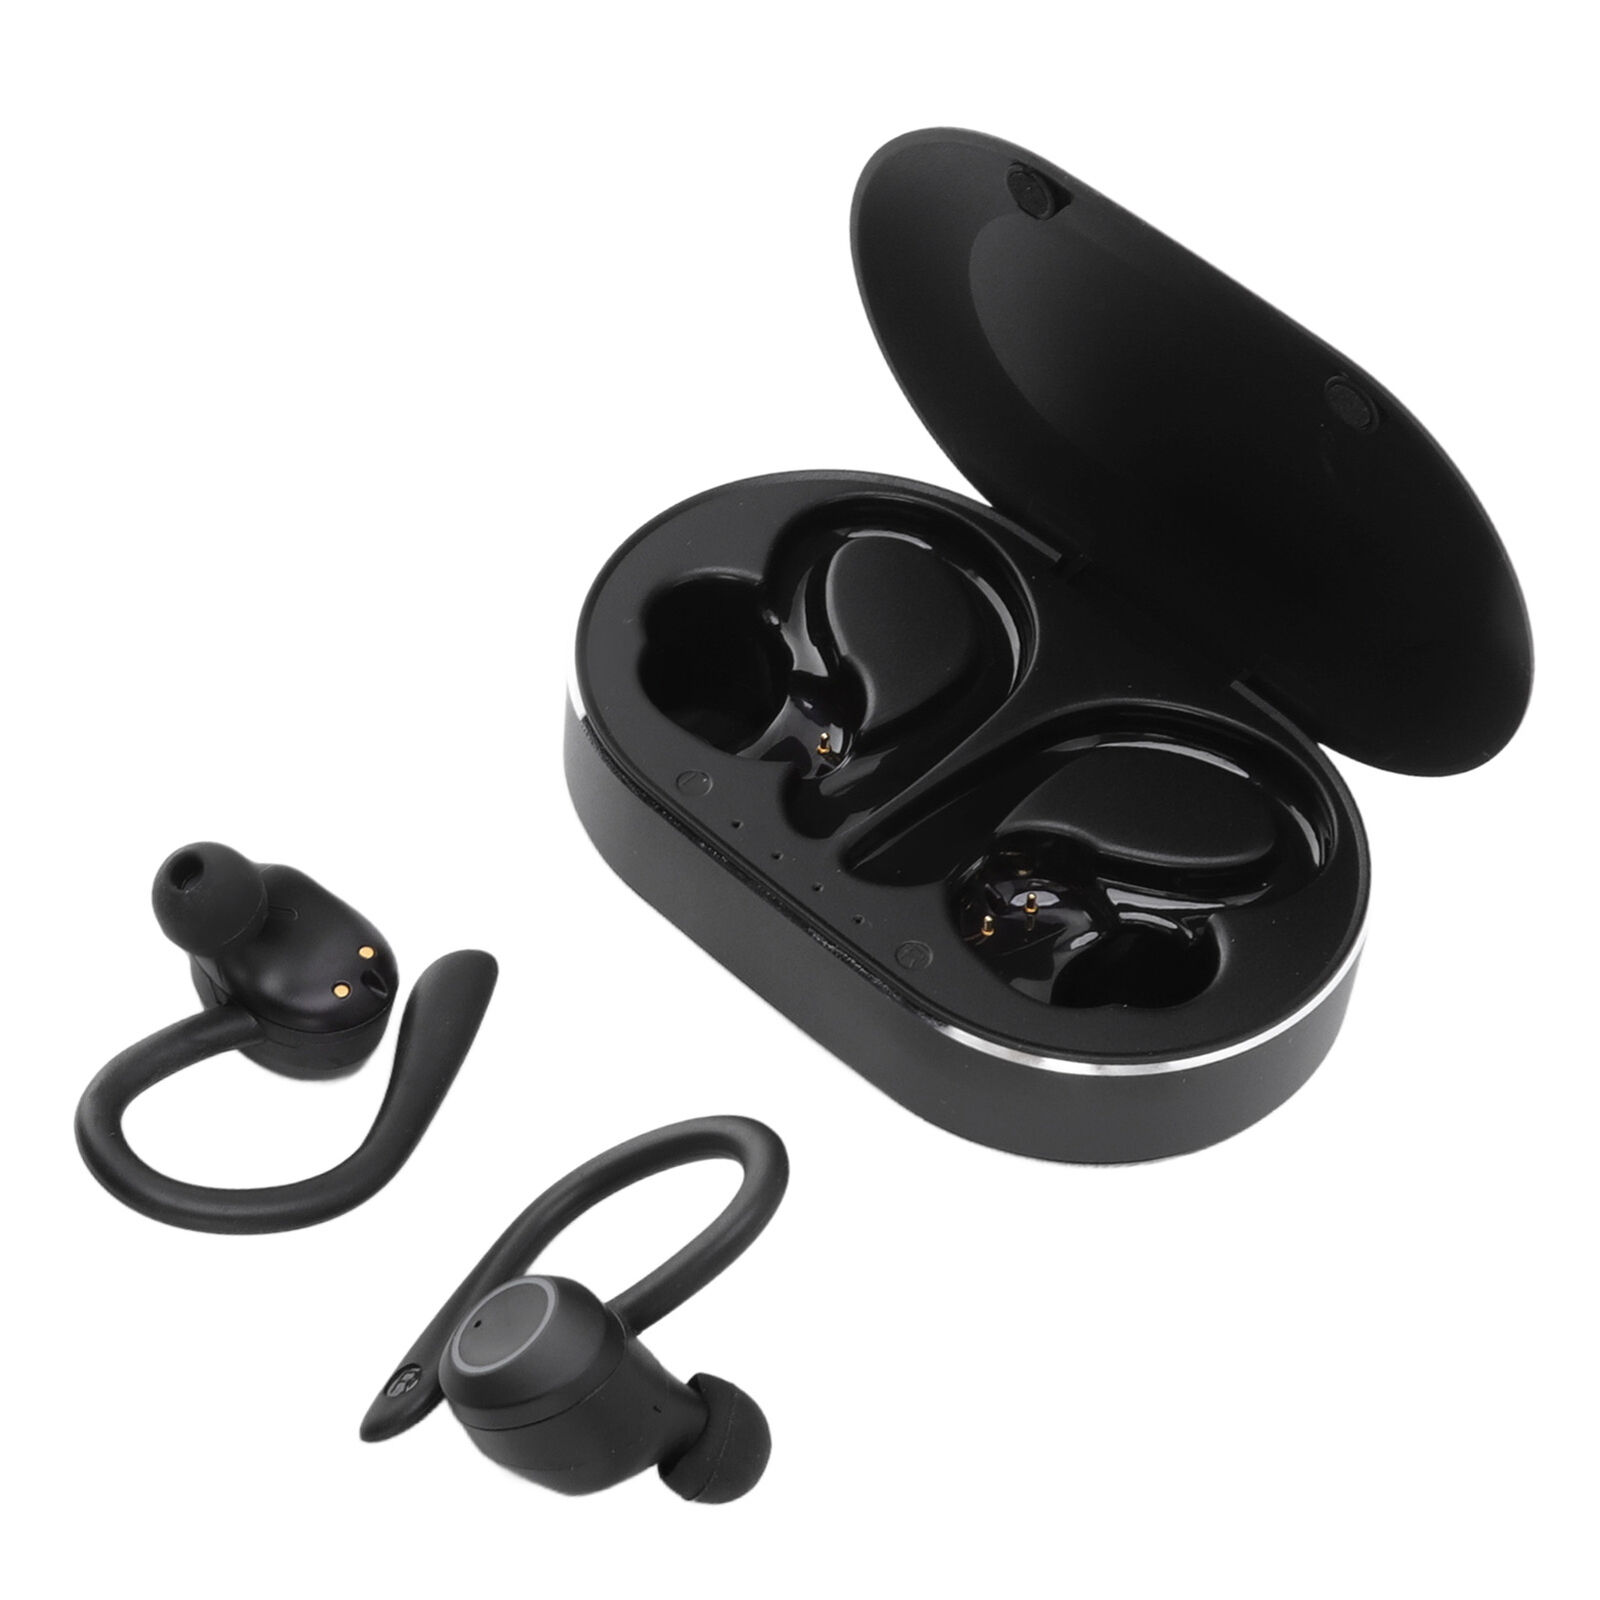 Connecting Your Wireless Earbuds: A Quick Guide | CitizenSide